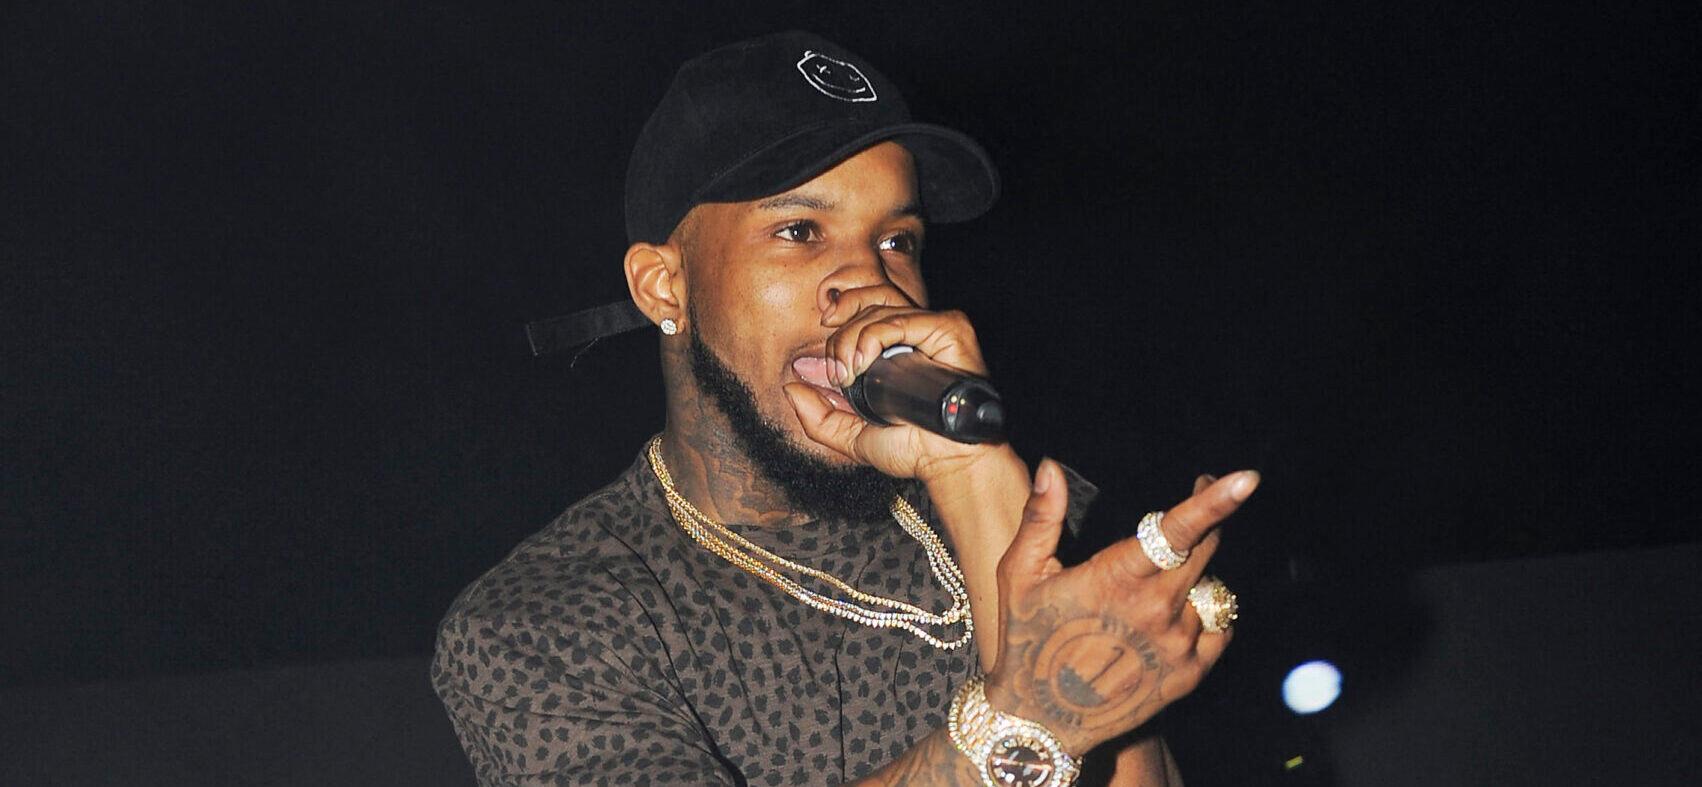 Tory Lanez’ Baby Mama Suffers ‘Significant And Severe Bodily Injury’ In Car Accident